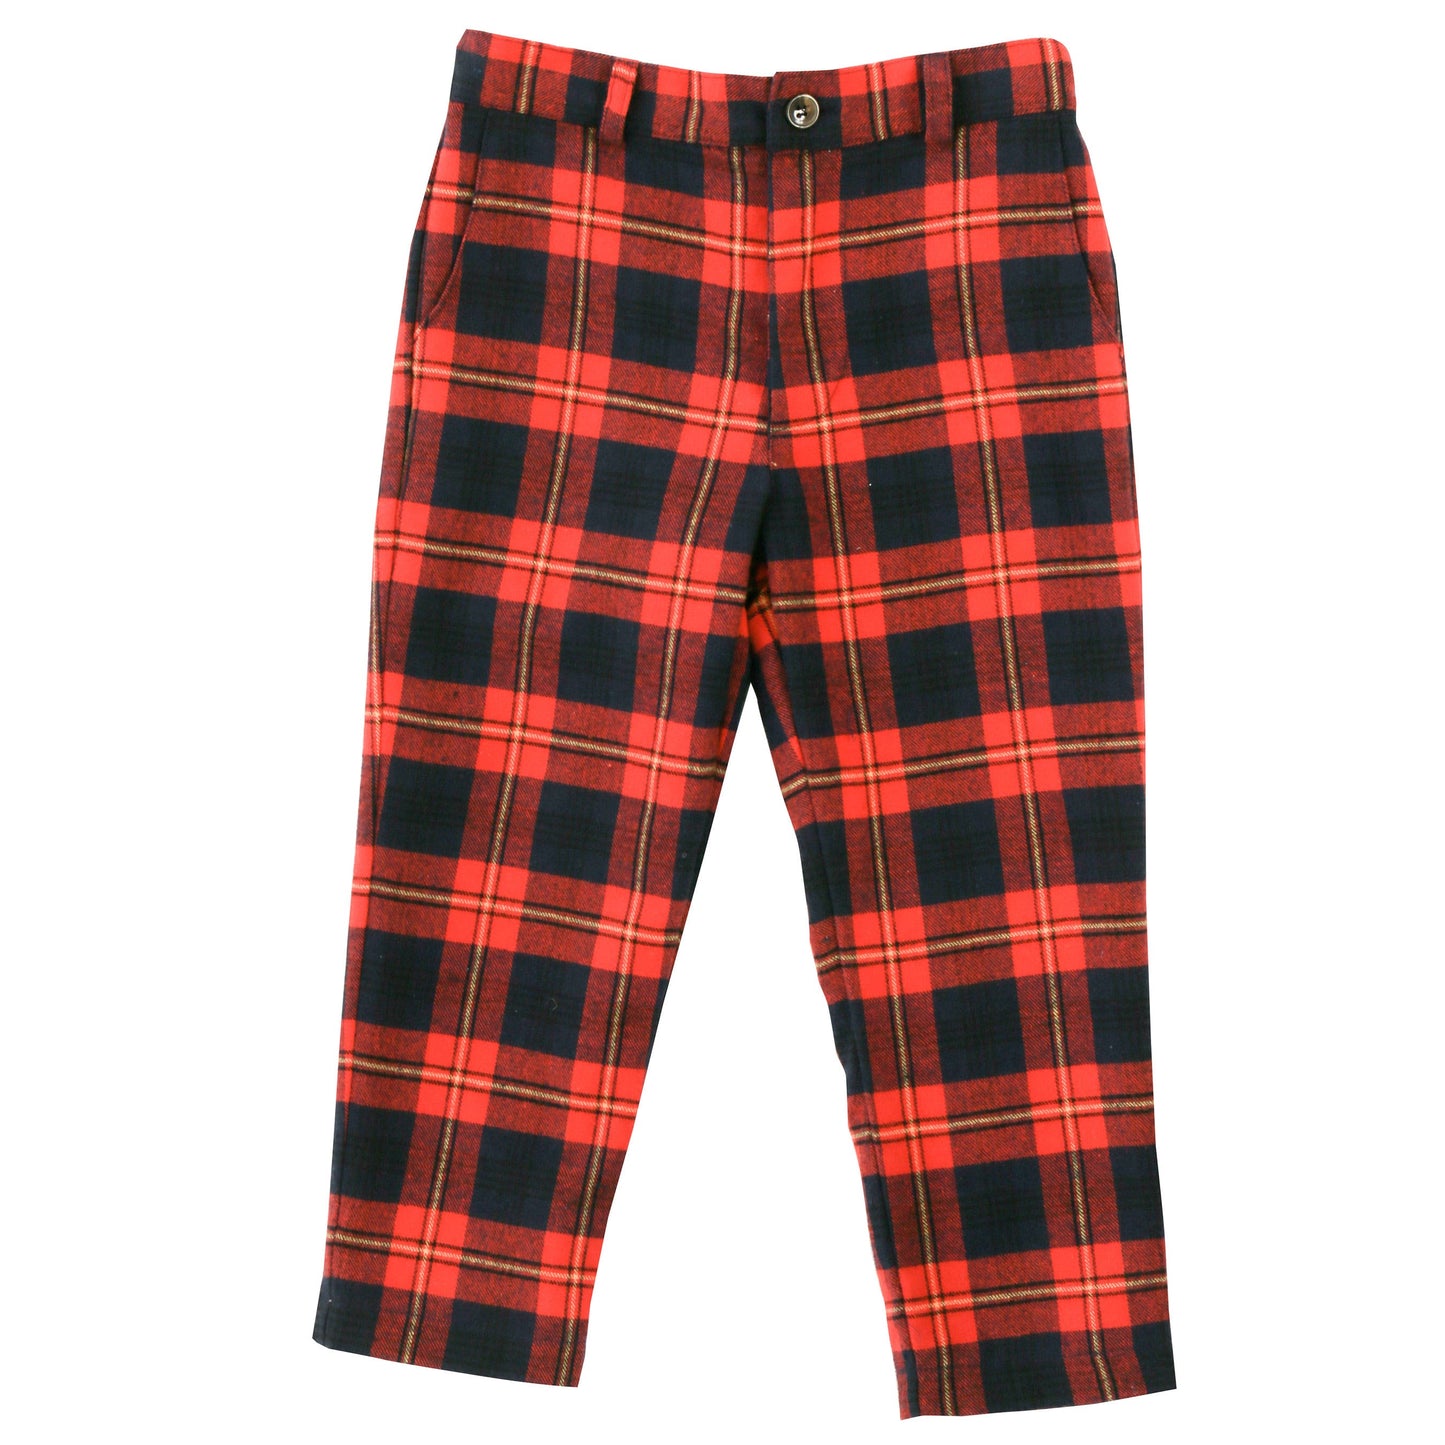 Alex Boys Flat Front Pant Red Yellow Plaid